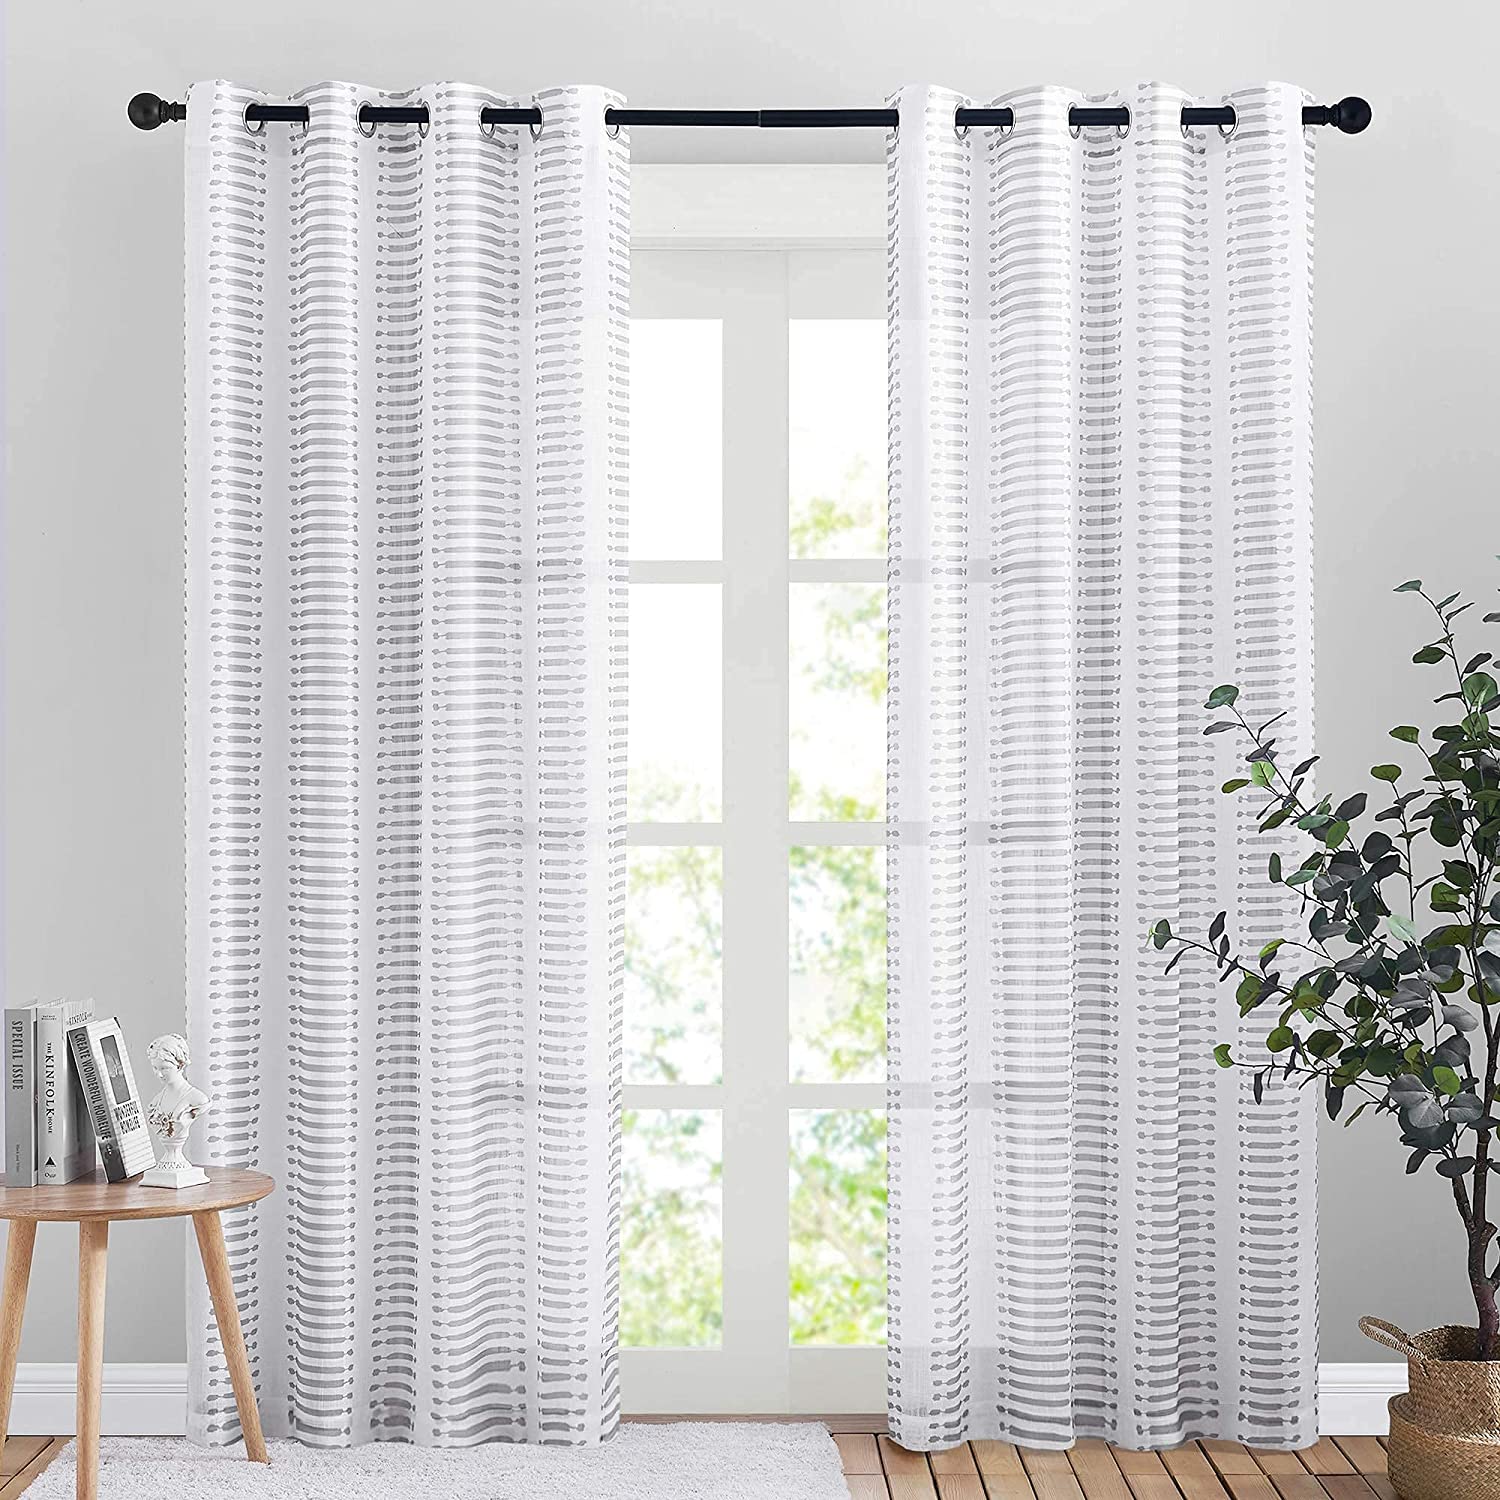 Grommet Sheer Privacy Voile Linen Curtains For Bedroom And Living Room 1 Pair KGORGE Store